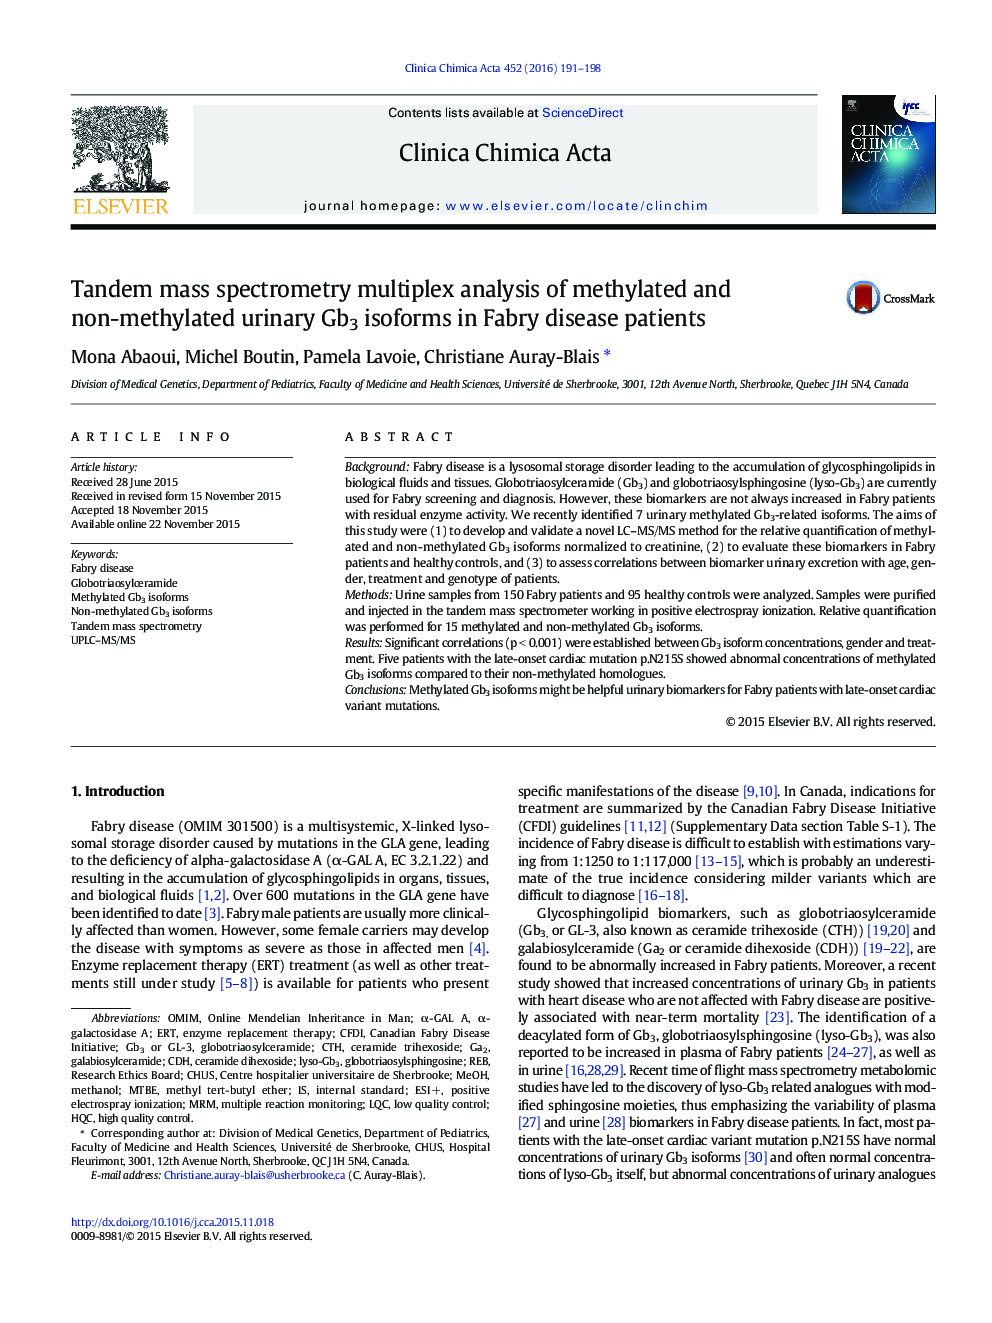 Tandem mass spectrometry multiplex analysis of methylated and non-methylated urinary Gb3 isoforms in Fabry disease patients